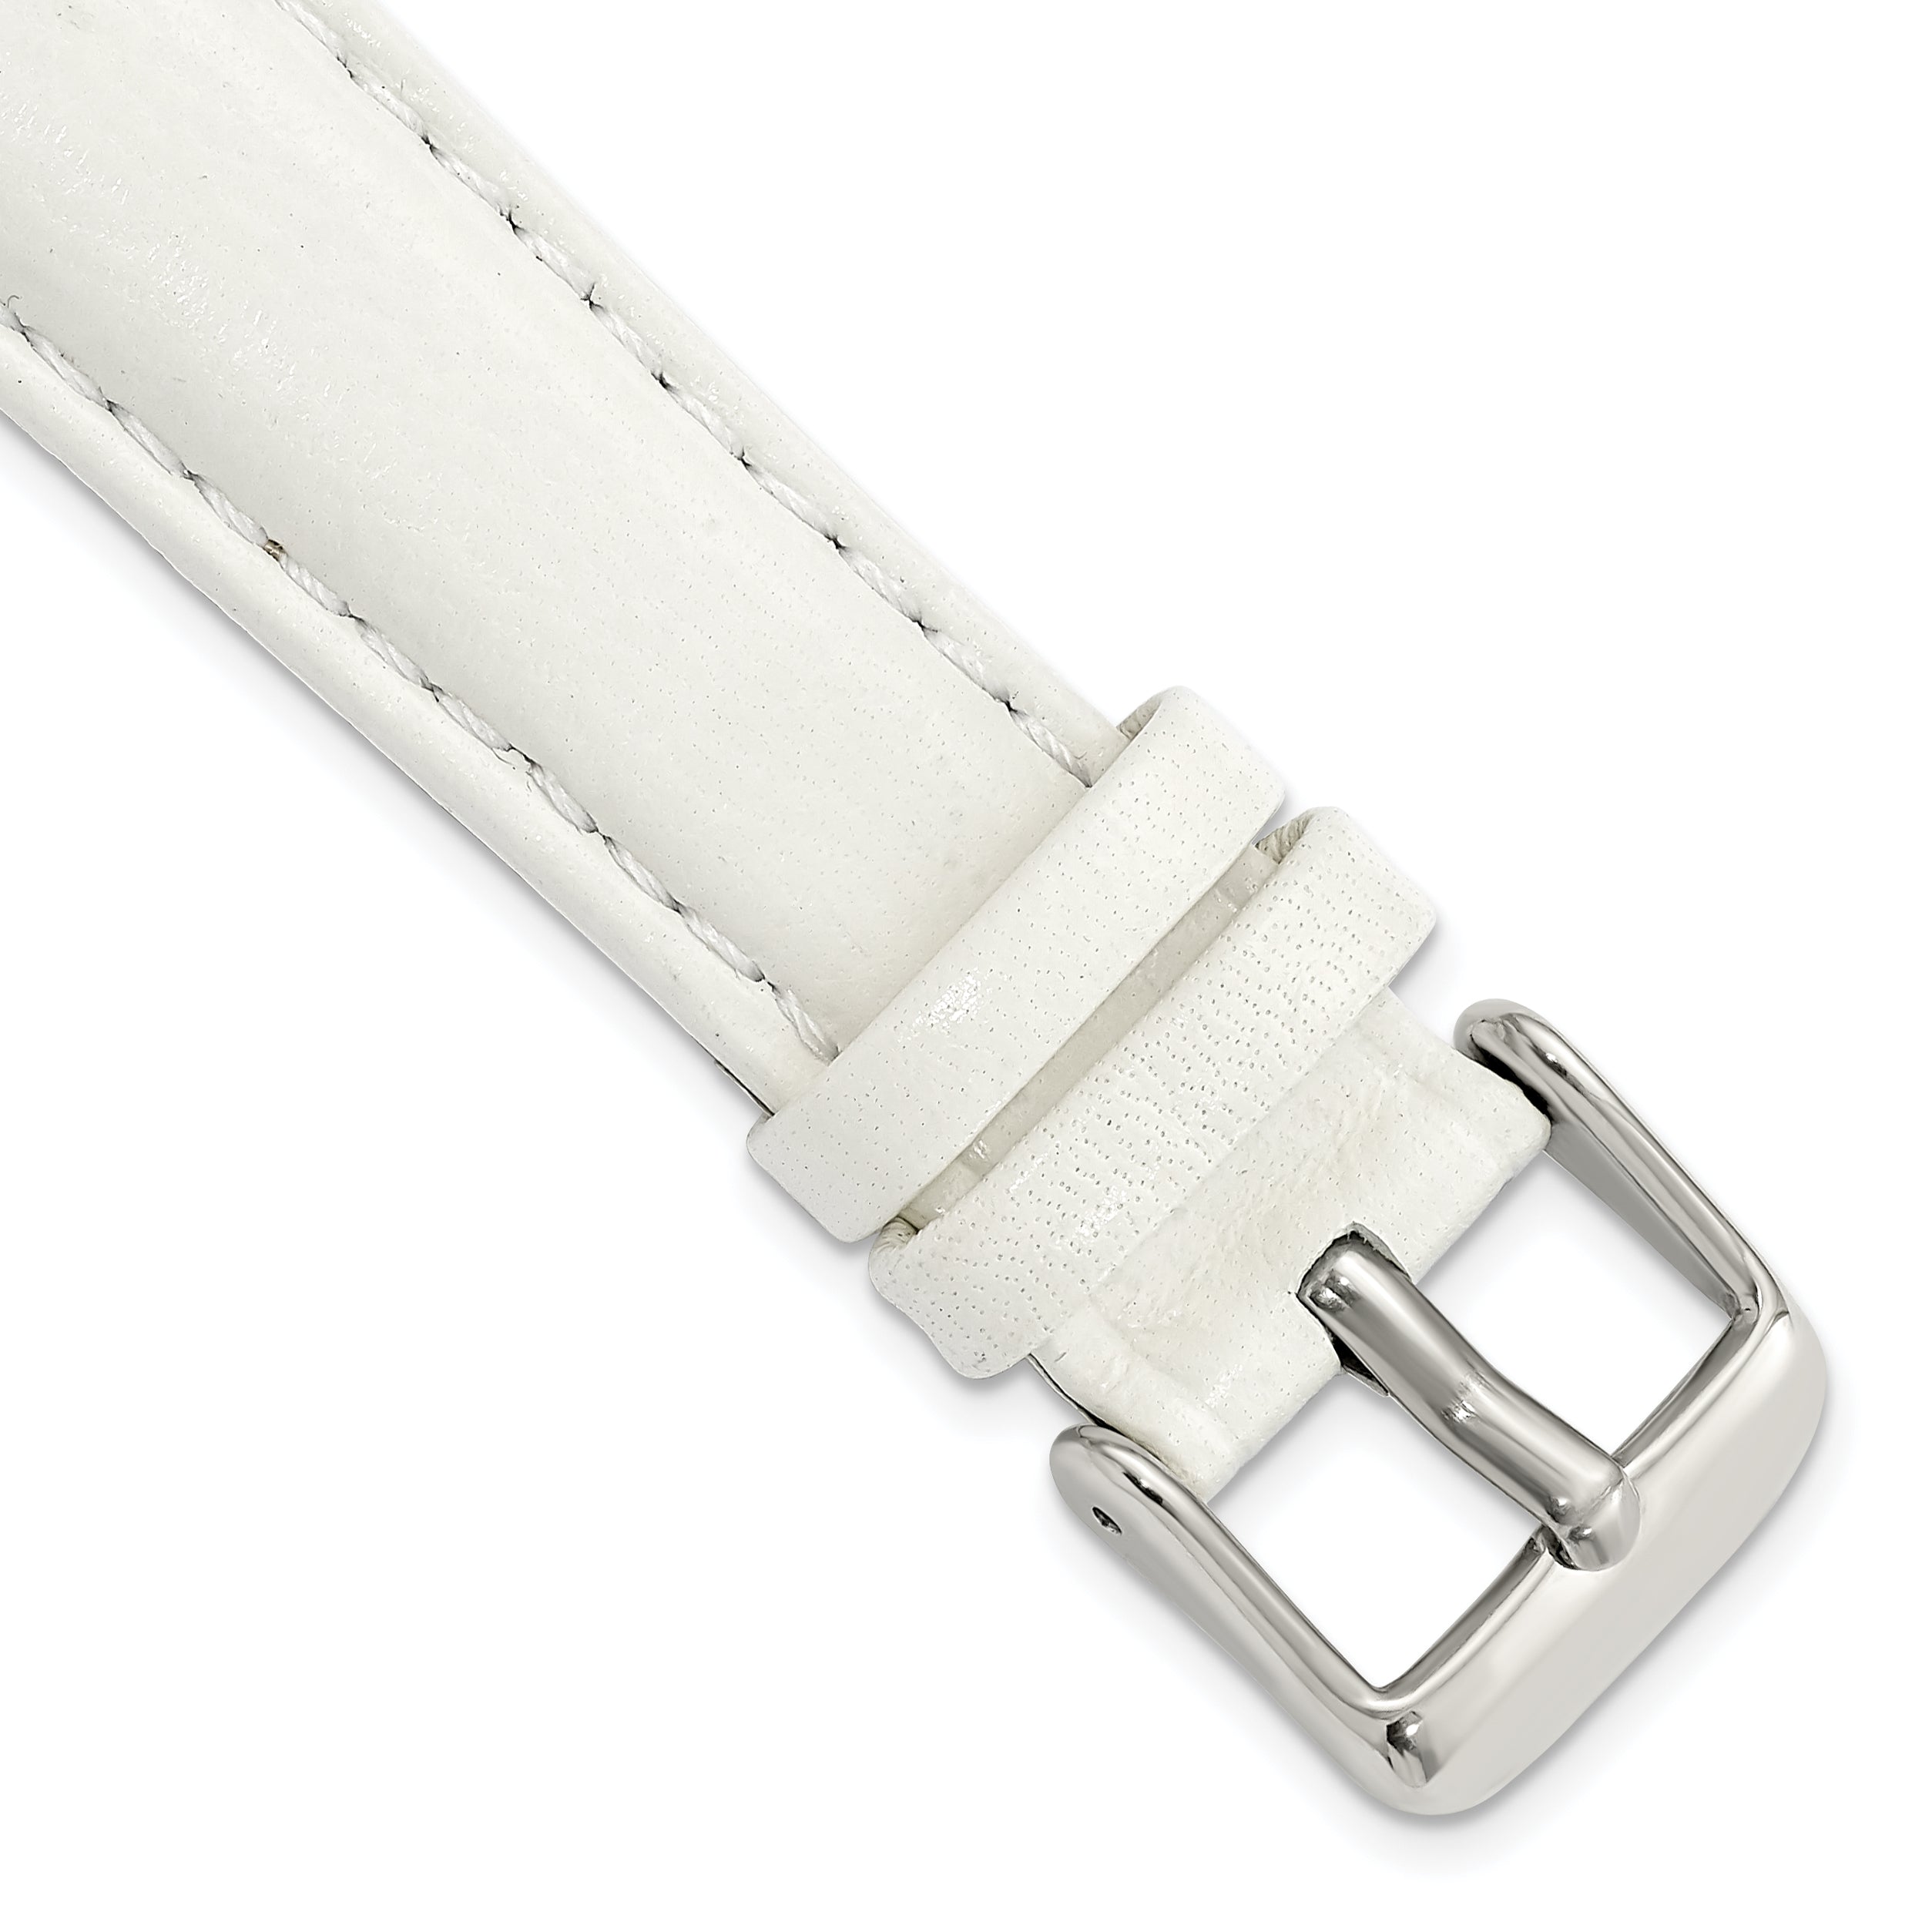 DeBeer 19mm White Glove Leather with Silver-tone Panerai Style Buckle 7.75 inch Watch Band